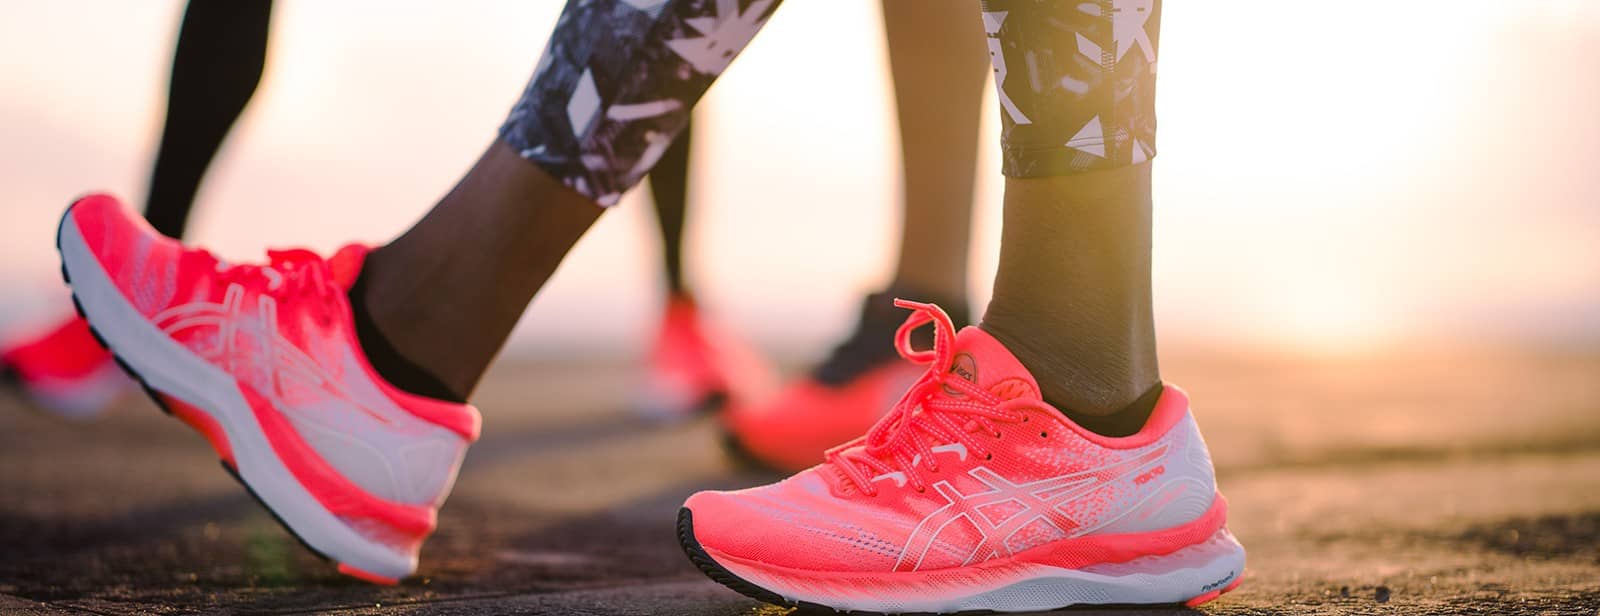 How to choose your first running shoes